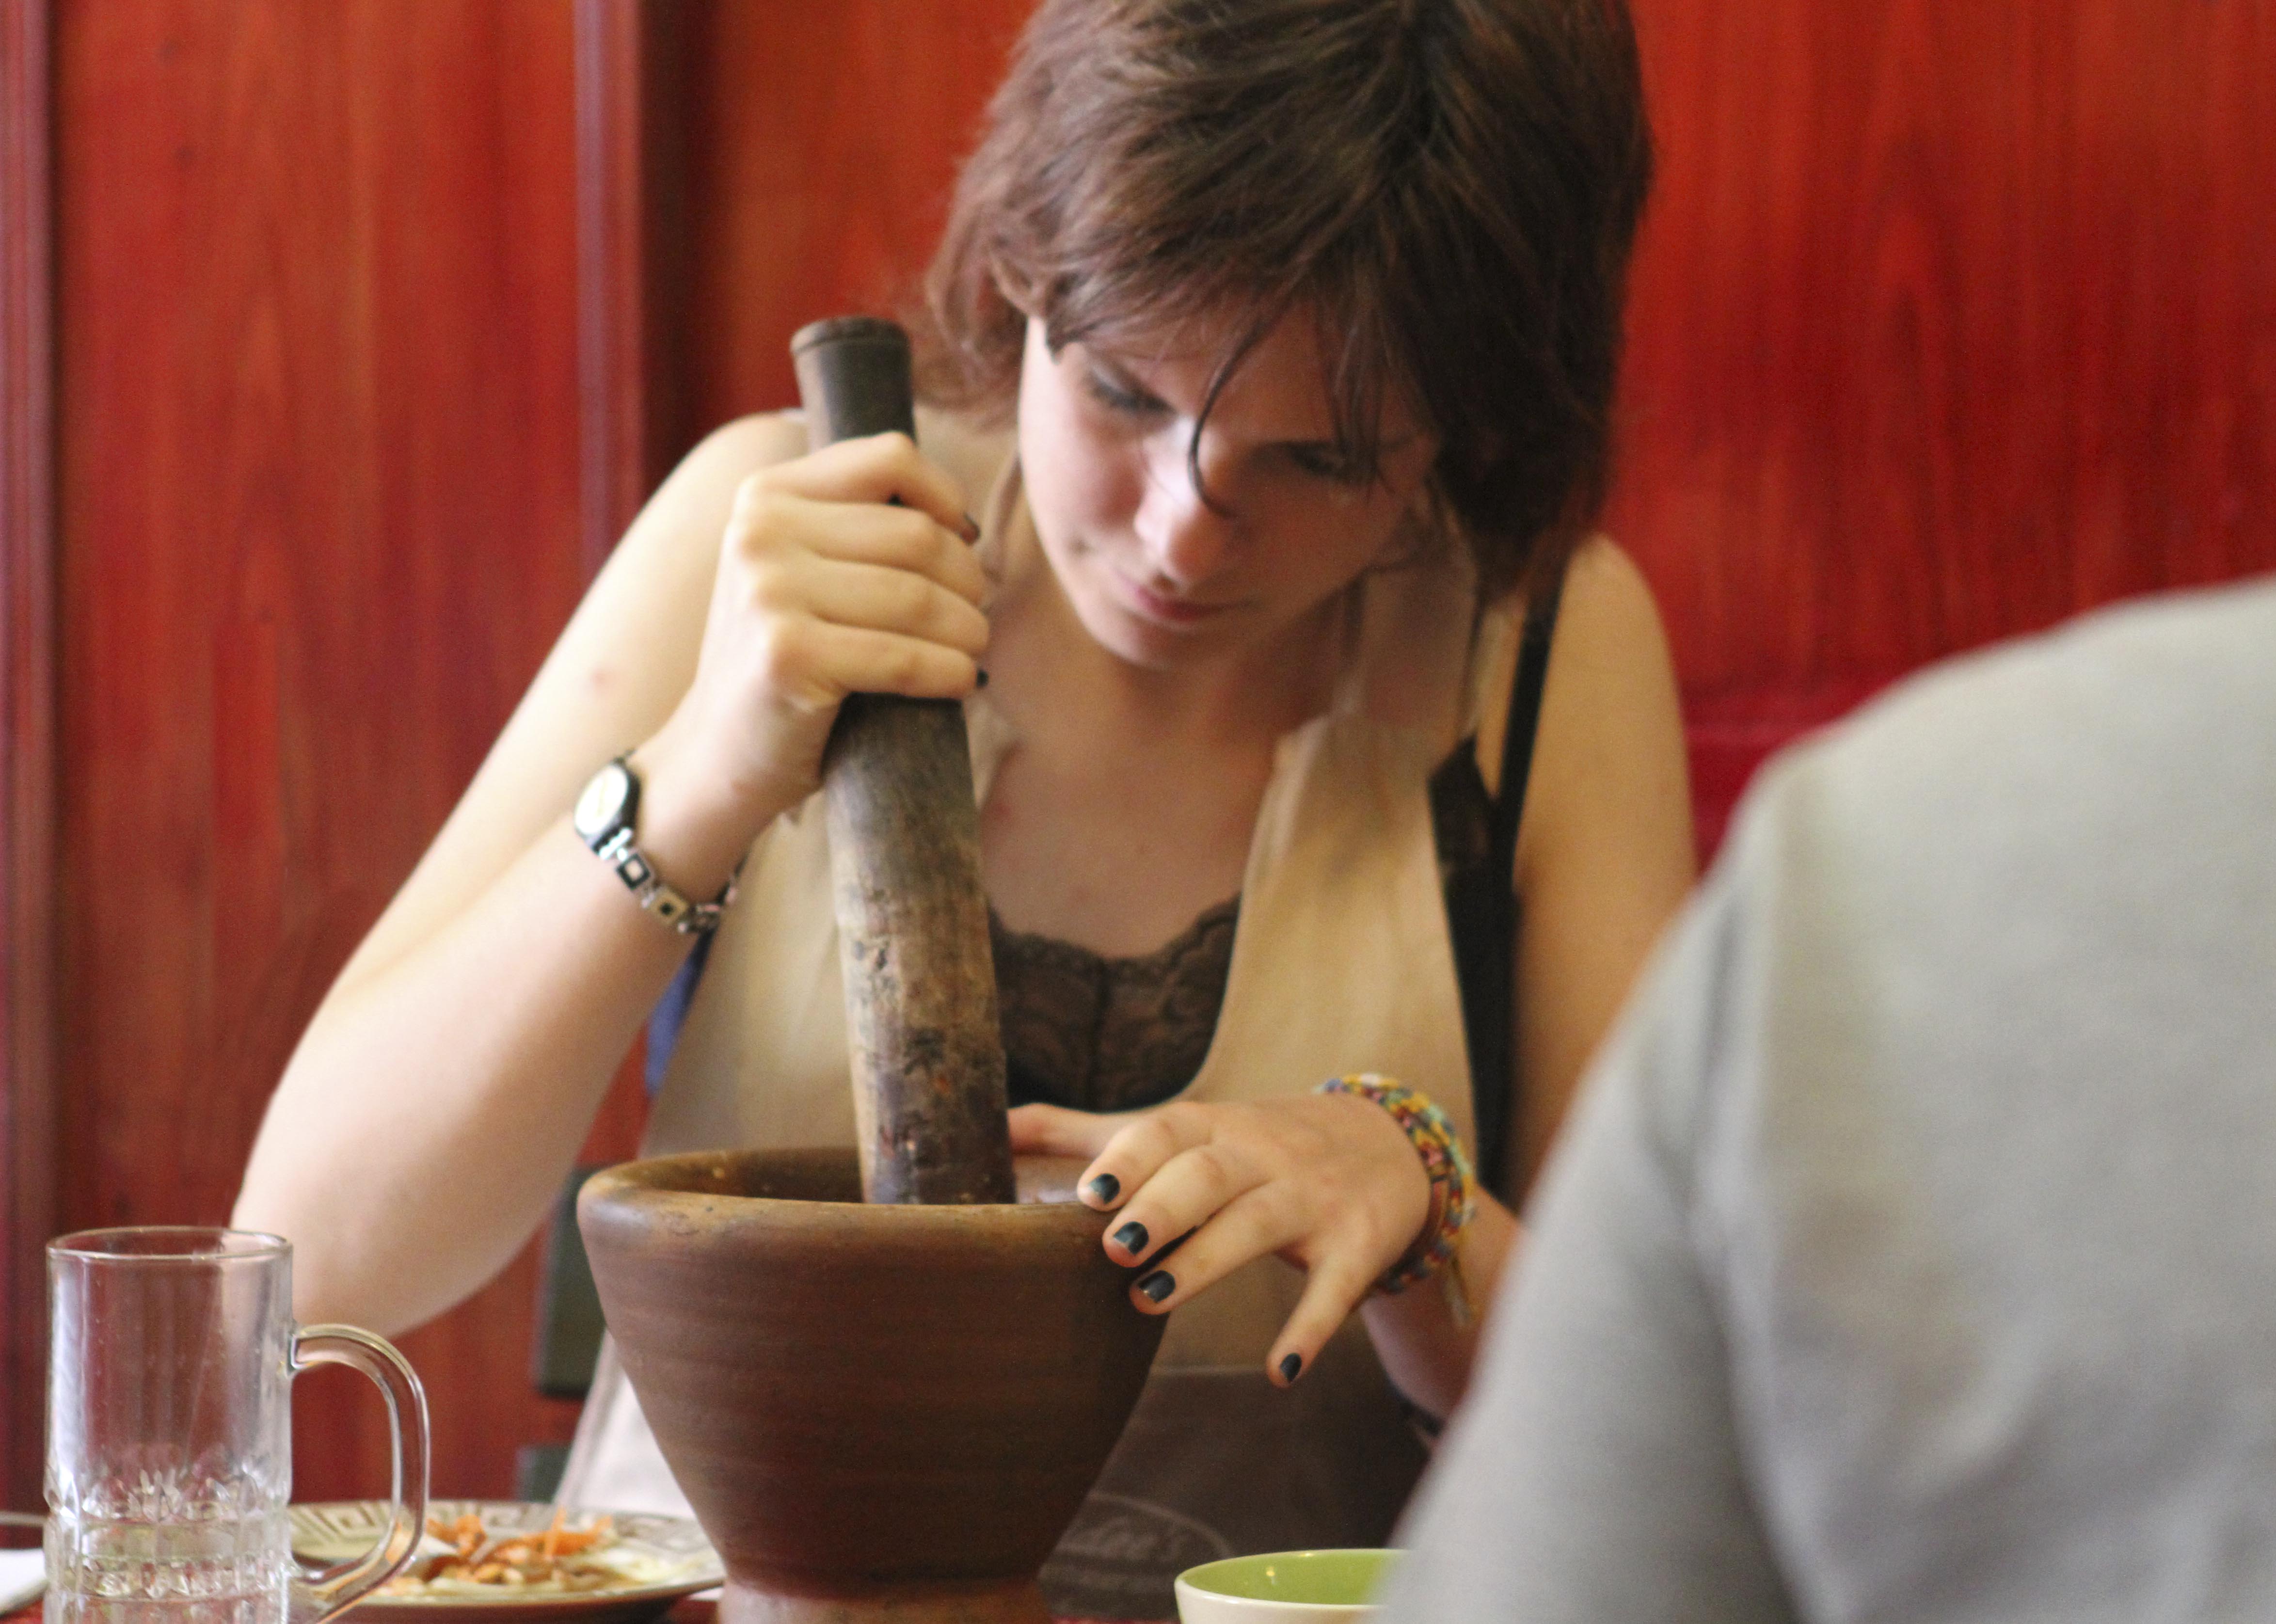 Cooking class student making chili paste with a mortar and pestle.